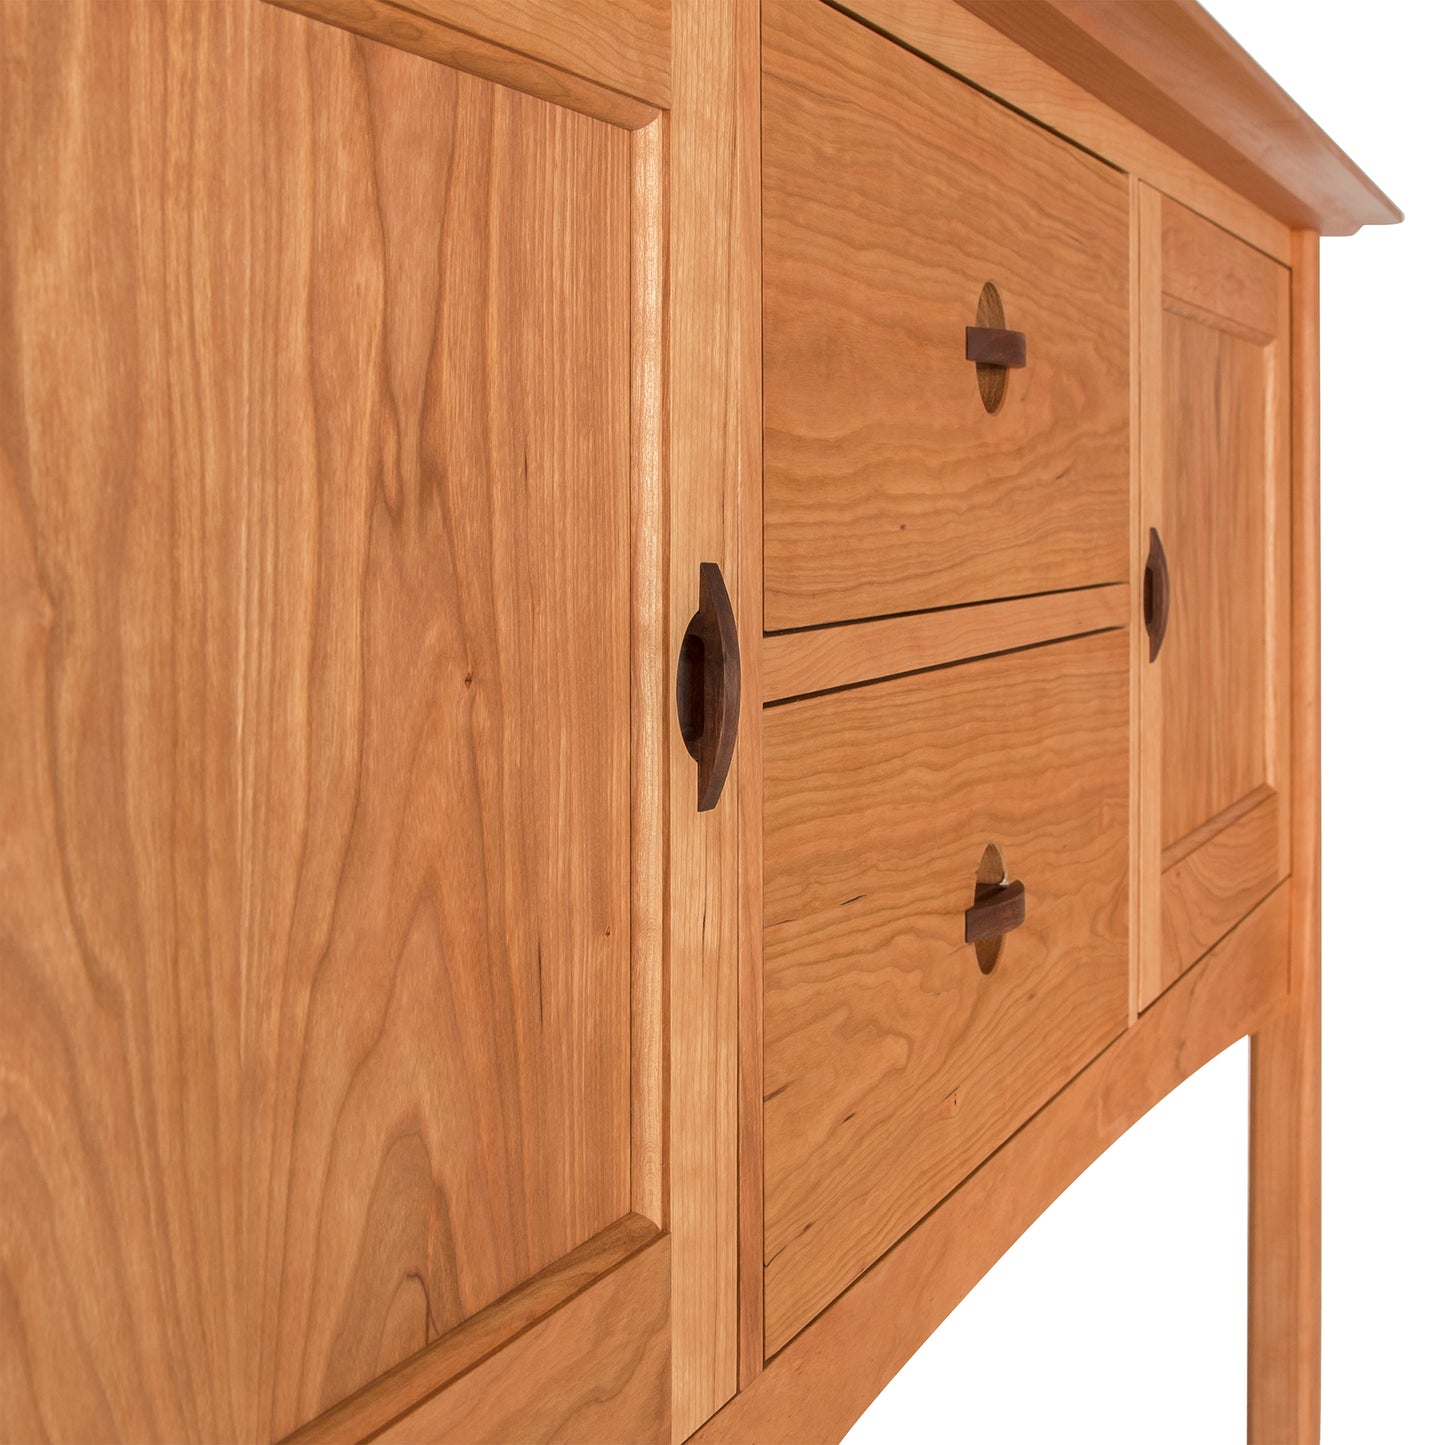 A close-up of a Maple Corner Woodworks Cherry Moon Hunt Board constructed from natural hardwoods, featuring two pull-out drawers with simple handles, set against a plain background.